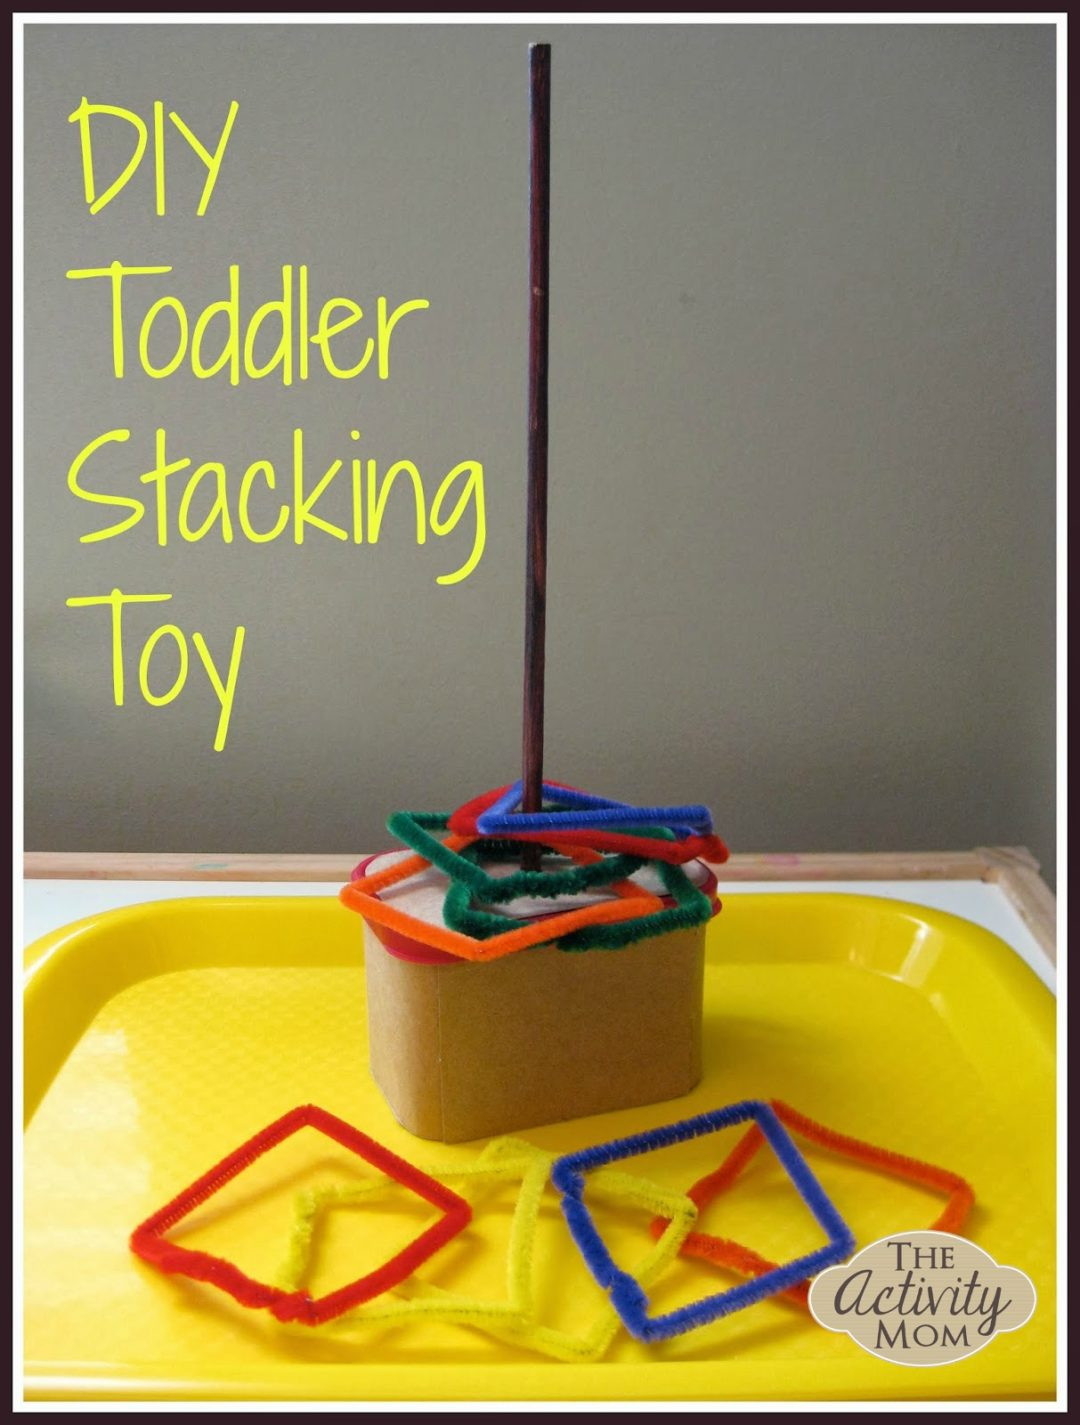 DIY Toddler Toy
 The Activity Mom DIY Toddler Stacking Toy The Activity Mom